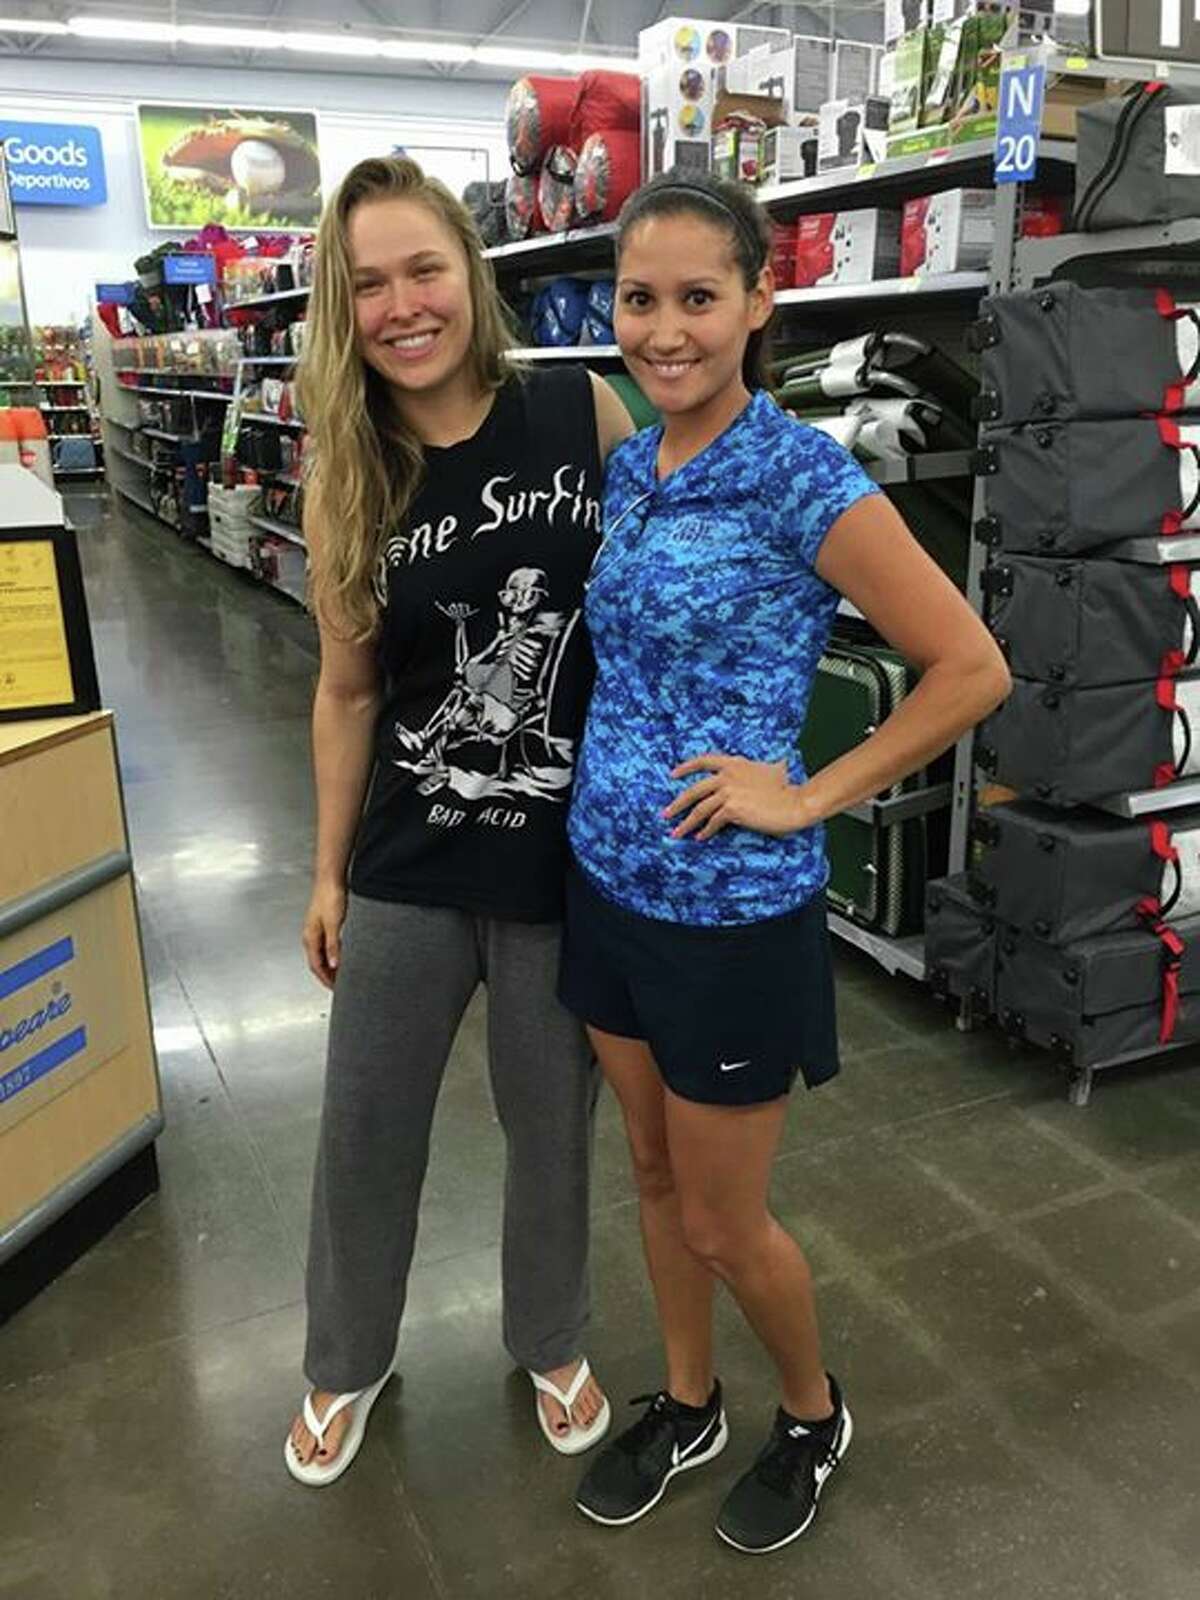 Kingsville residents were quick to snap photos with UFC champ Ronda Rousey at the Kingsville Walmart on Wednesday morning, Aug. 11, 2015.